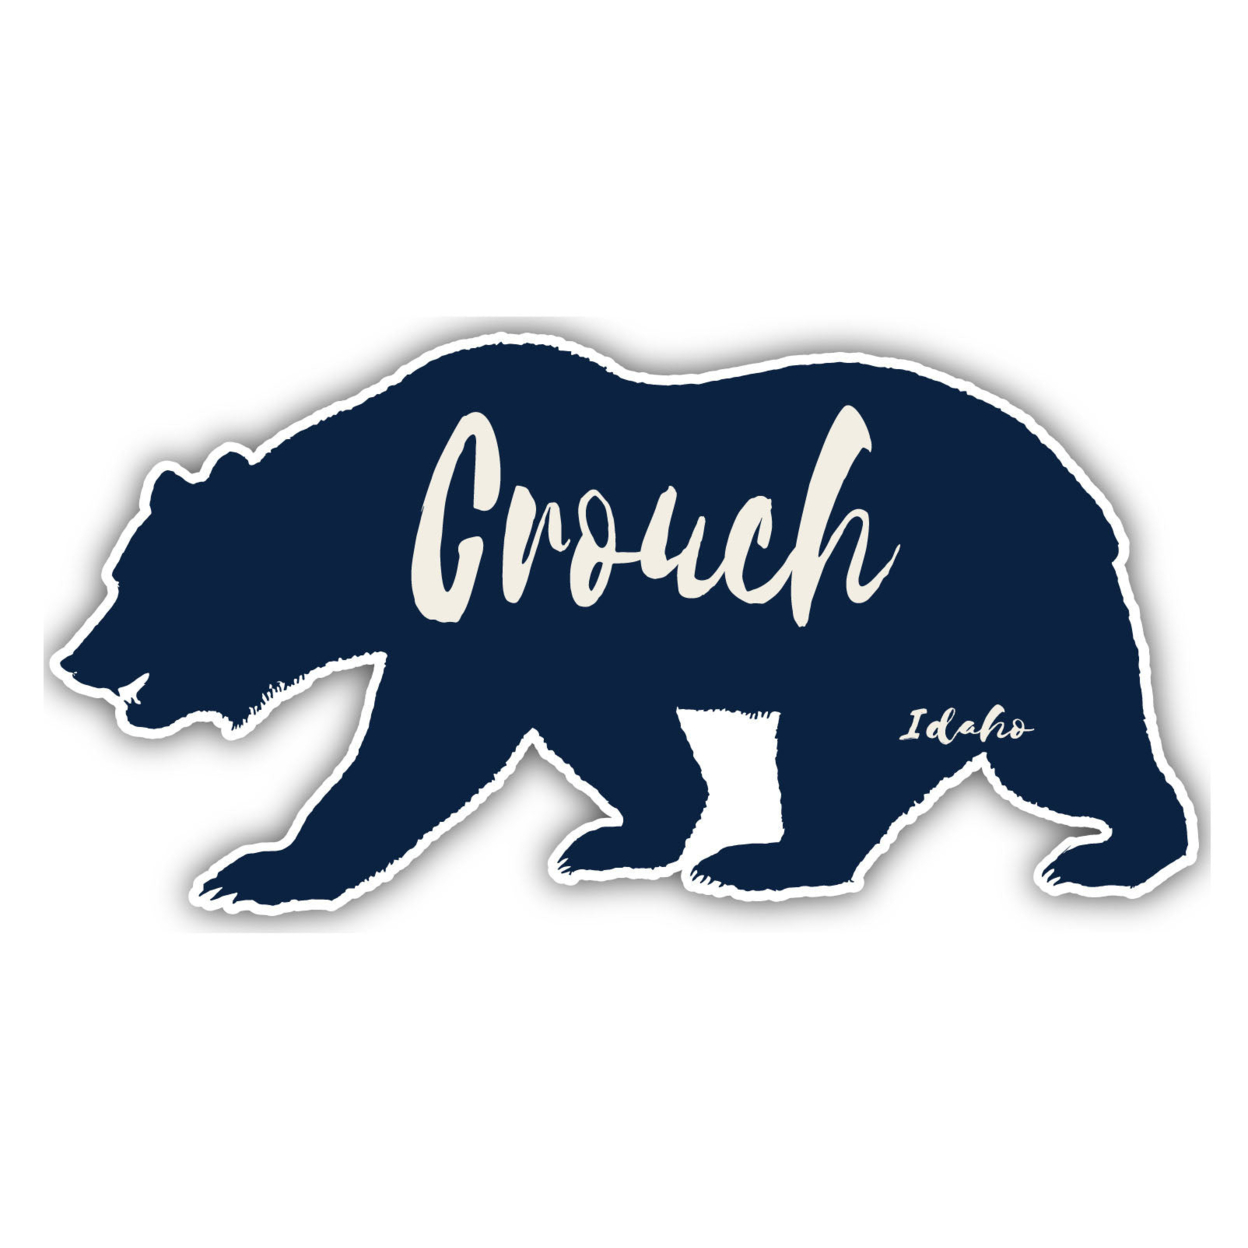 Crouch Idaho Souvenir Decorative Stickers (Choose Theme And Size) - 4-Pack, 8-Inch, Bear